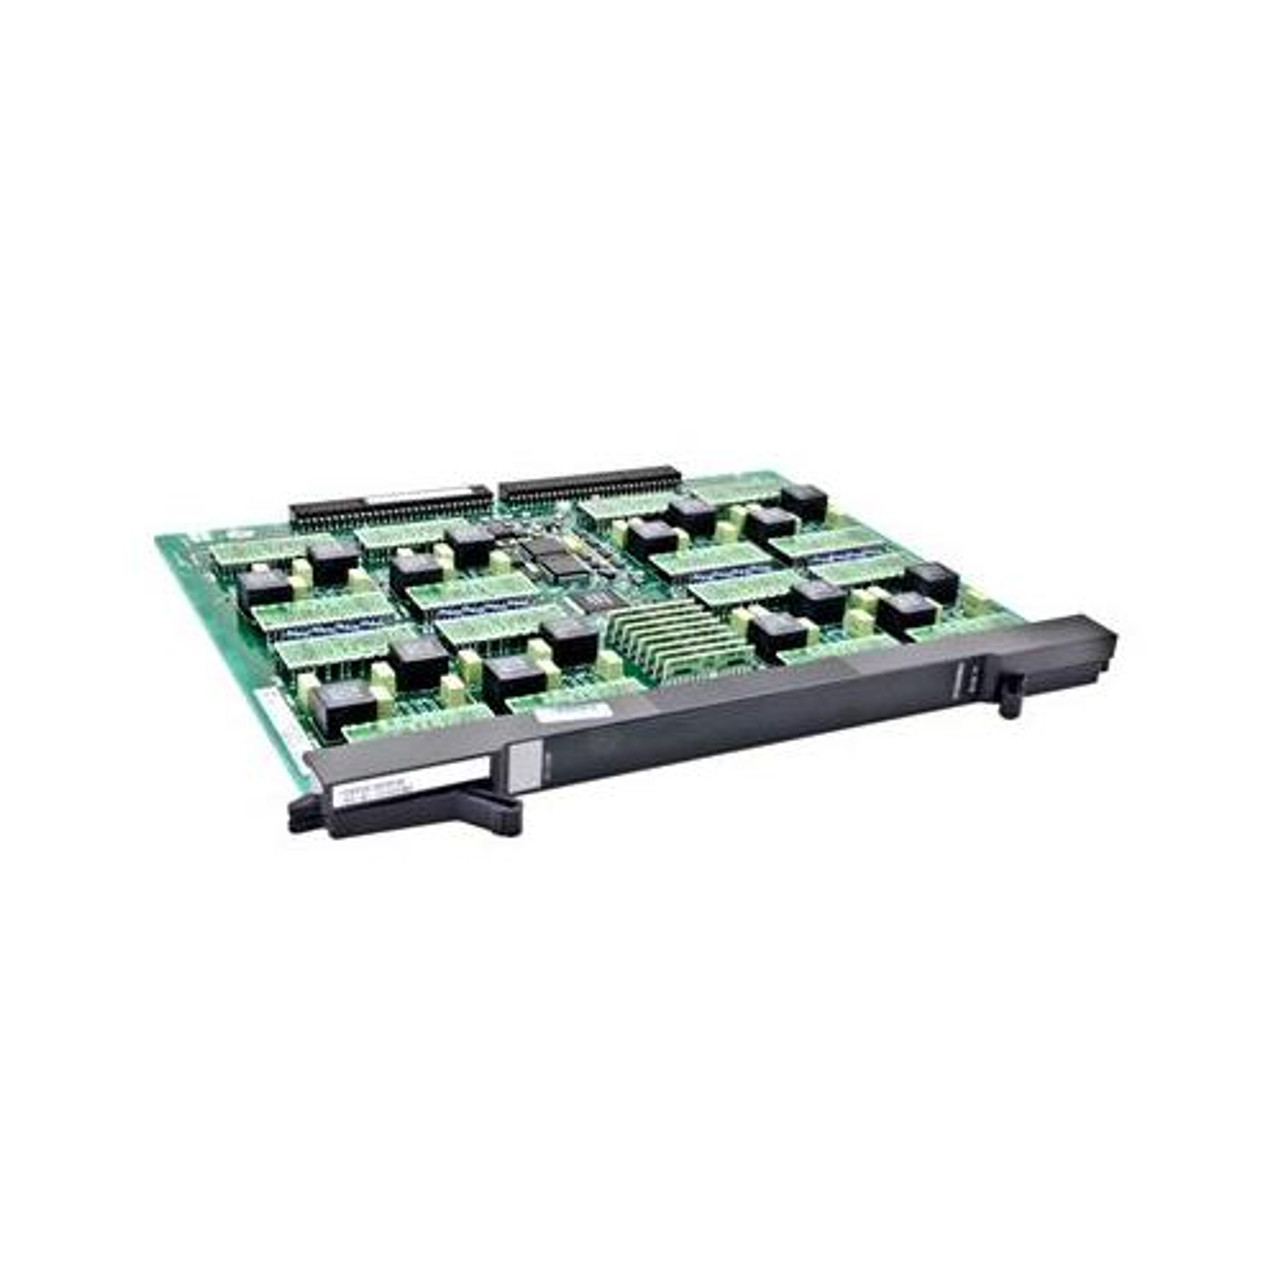 PCL-728-AE Advantech PCL-728 2-Channel 12-bit Isolated Analog Output Card